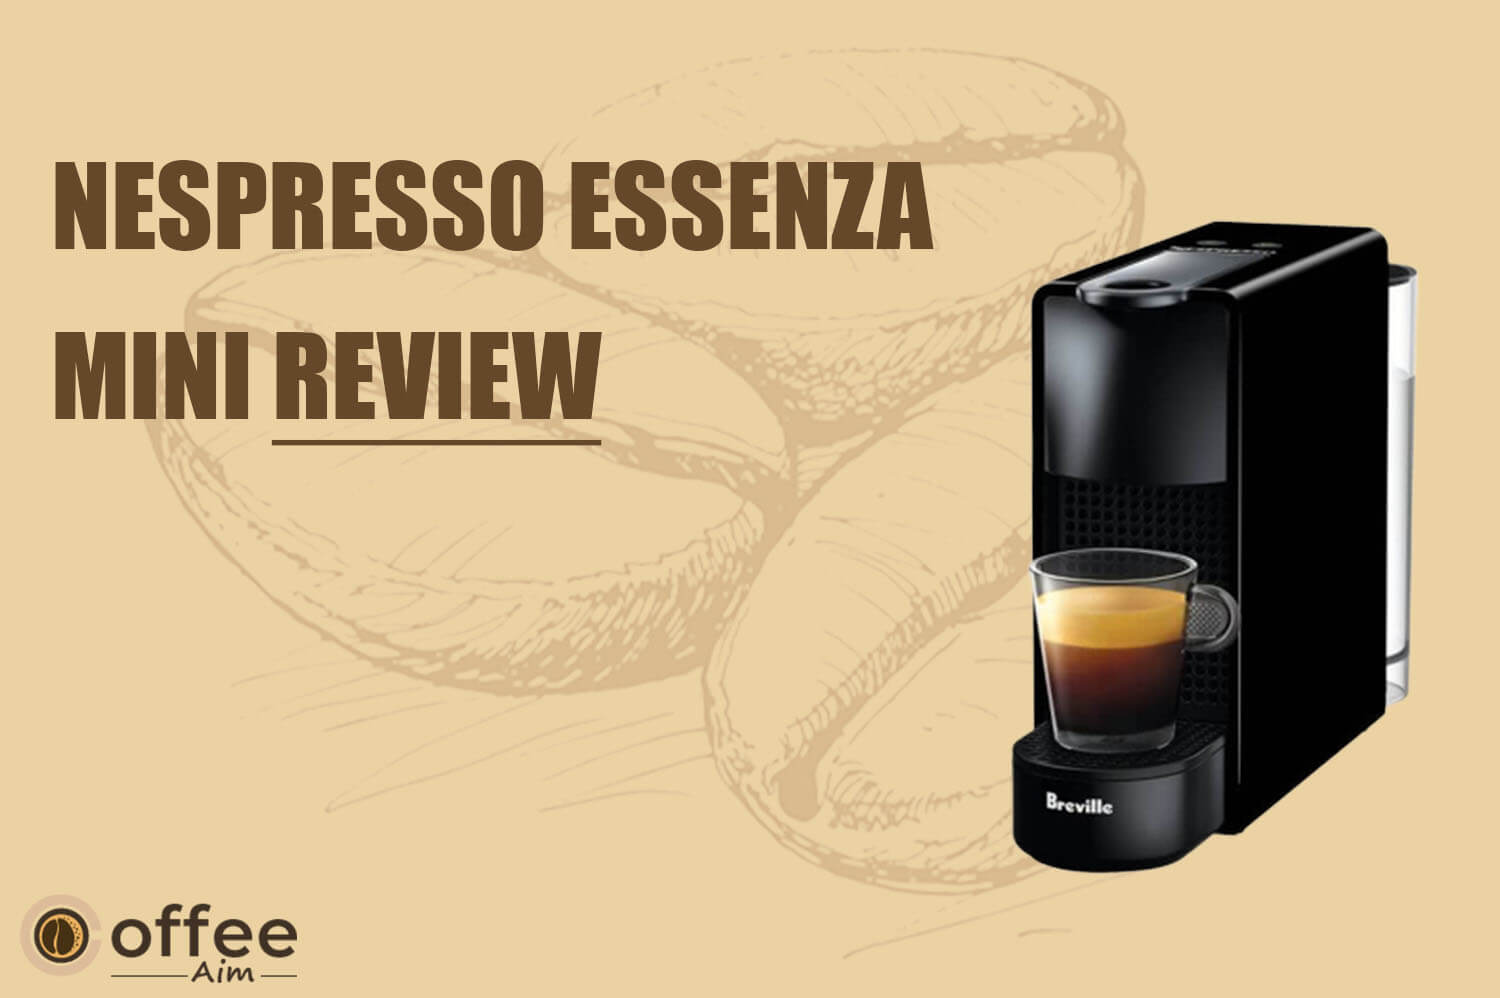 Featured image for the article "Nespresso essenza mini review"